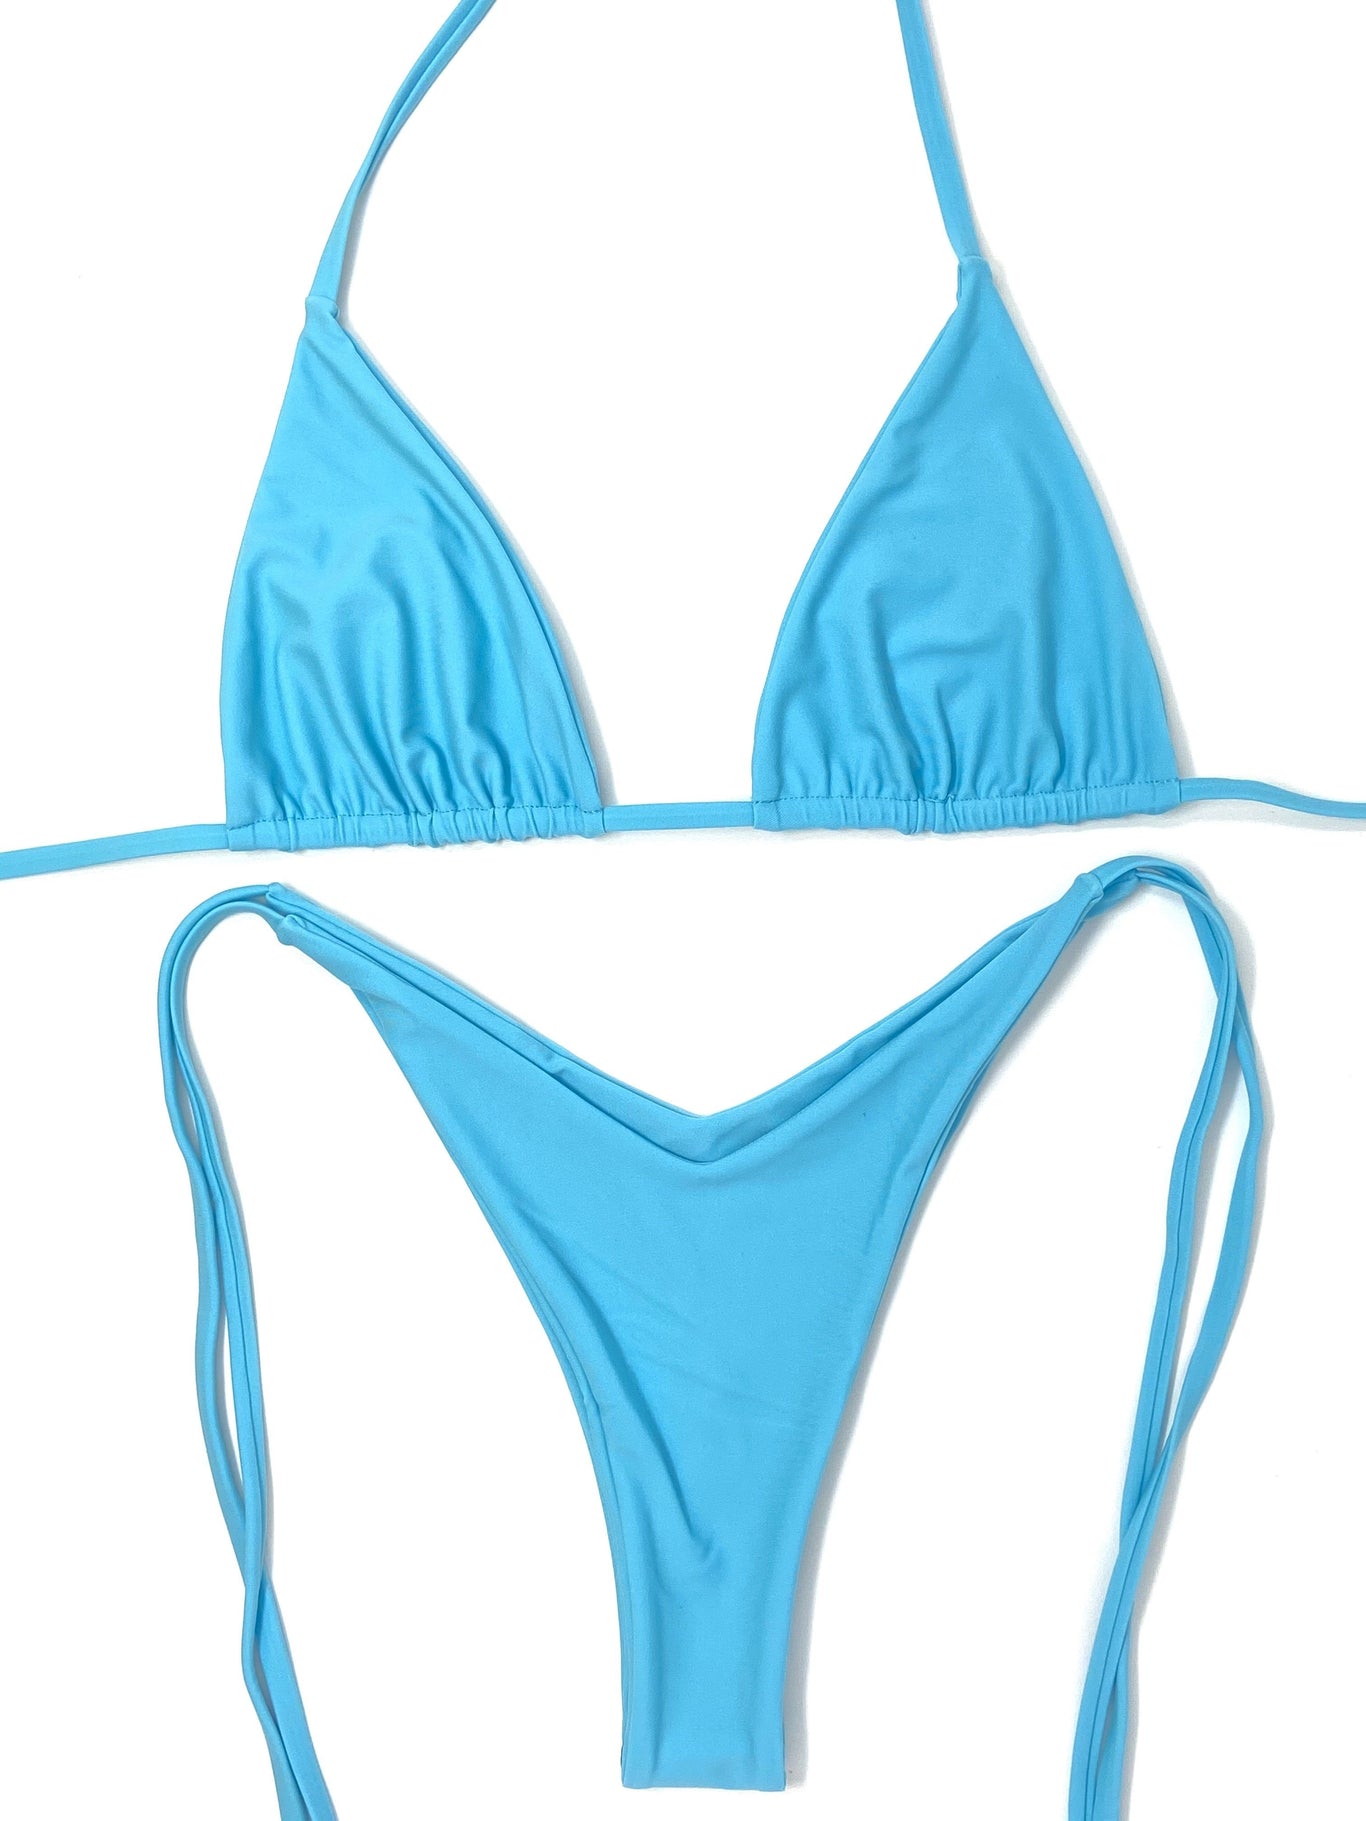 SOBE TRIANGLE TOP - COTTON CANDY BLUE